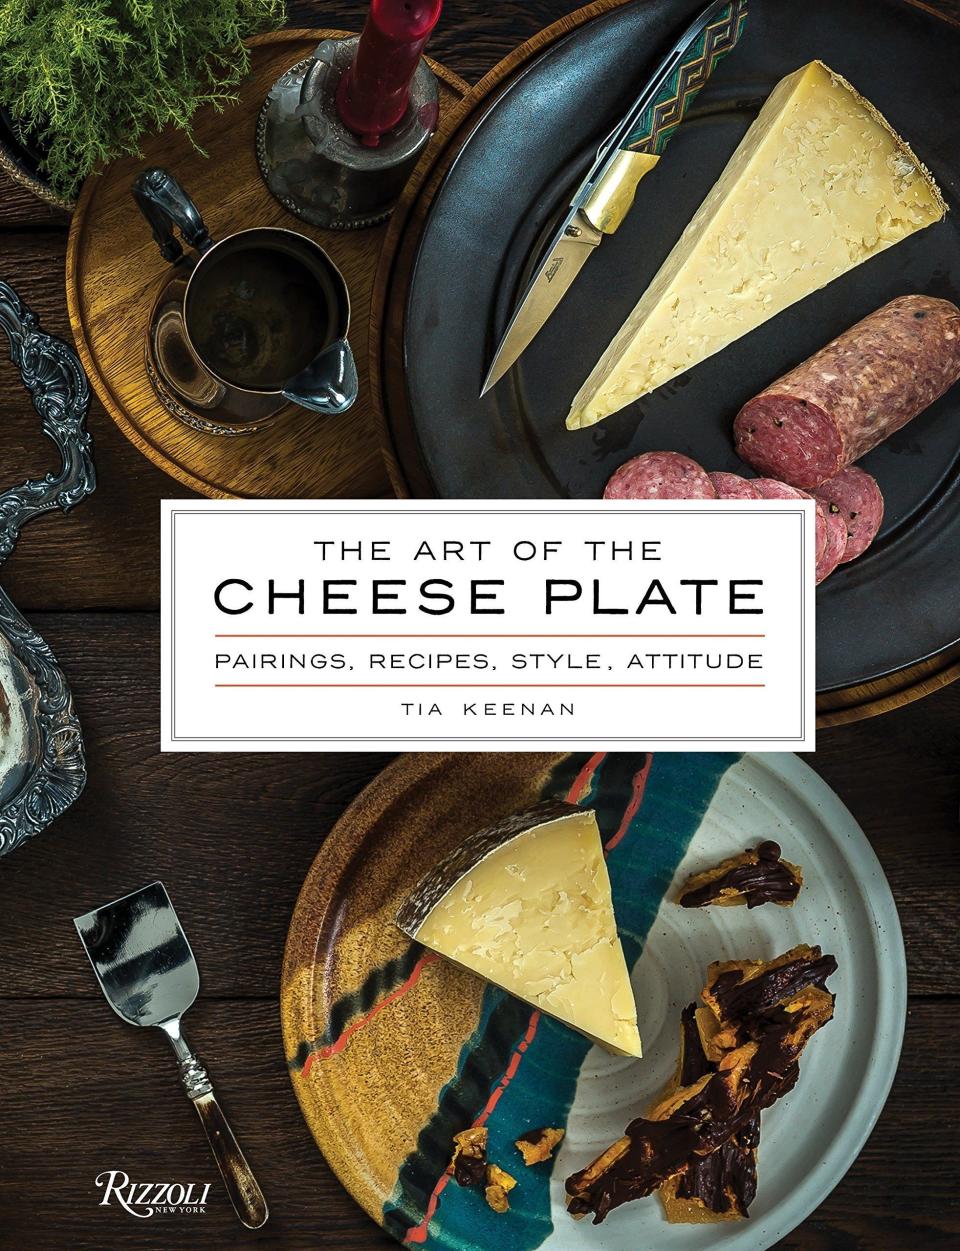 16) "The Art of the Cheese Plate"